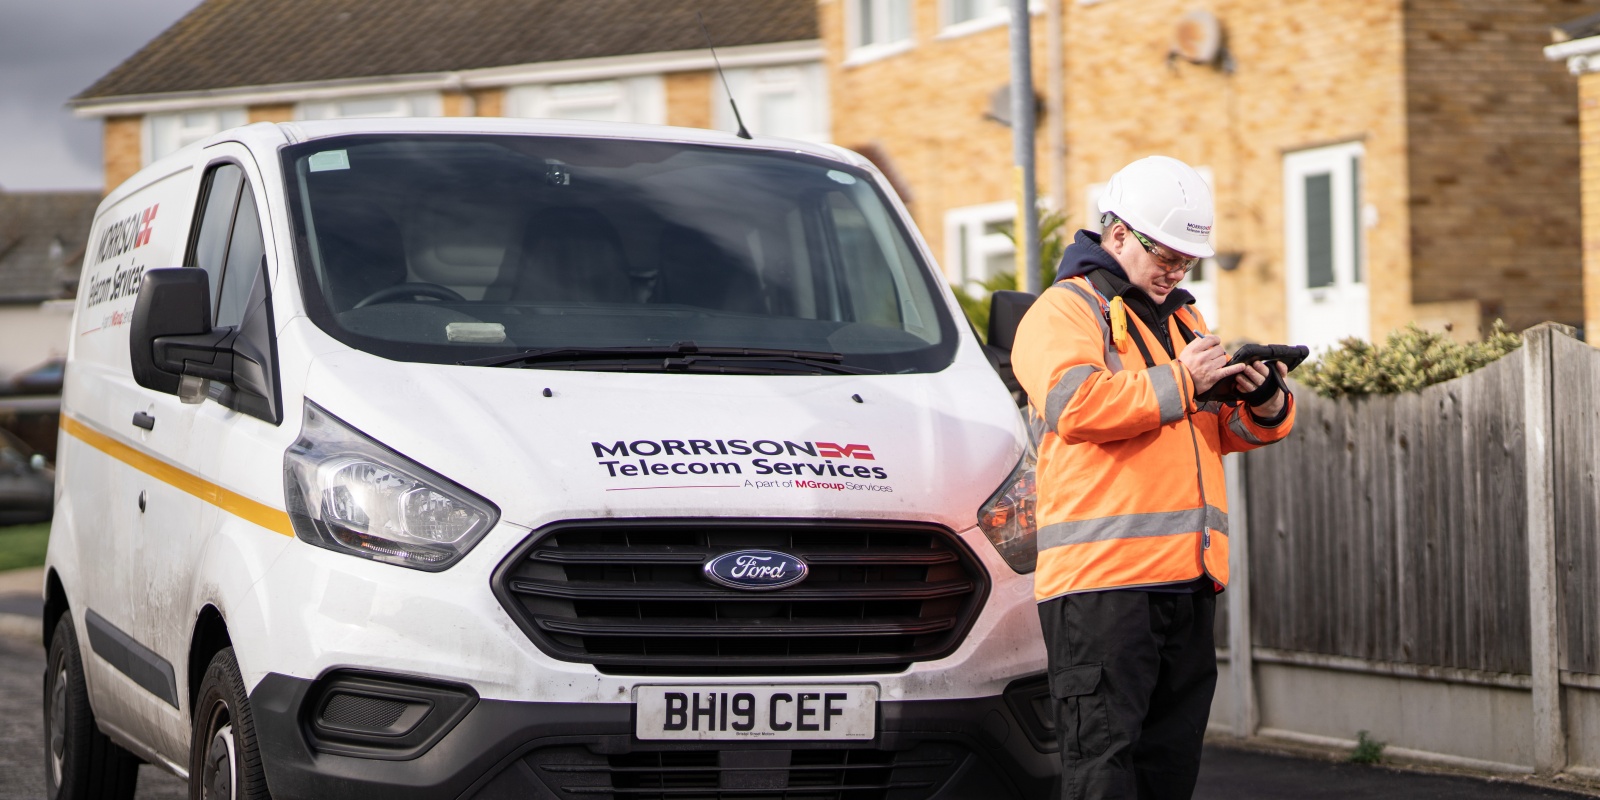 Morrison Telecom Services extends agreement with Openreach for fibre network build 